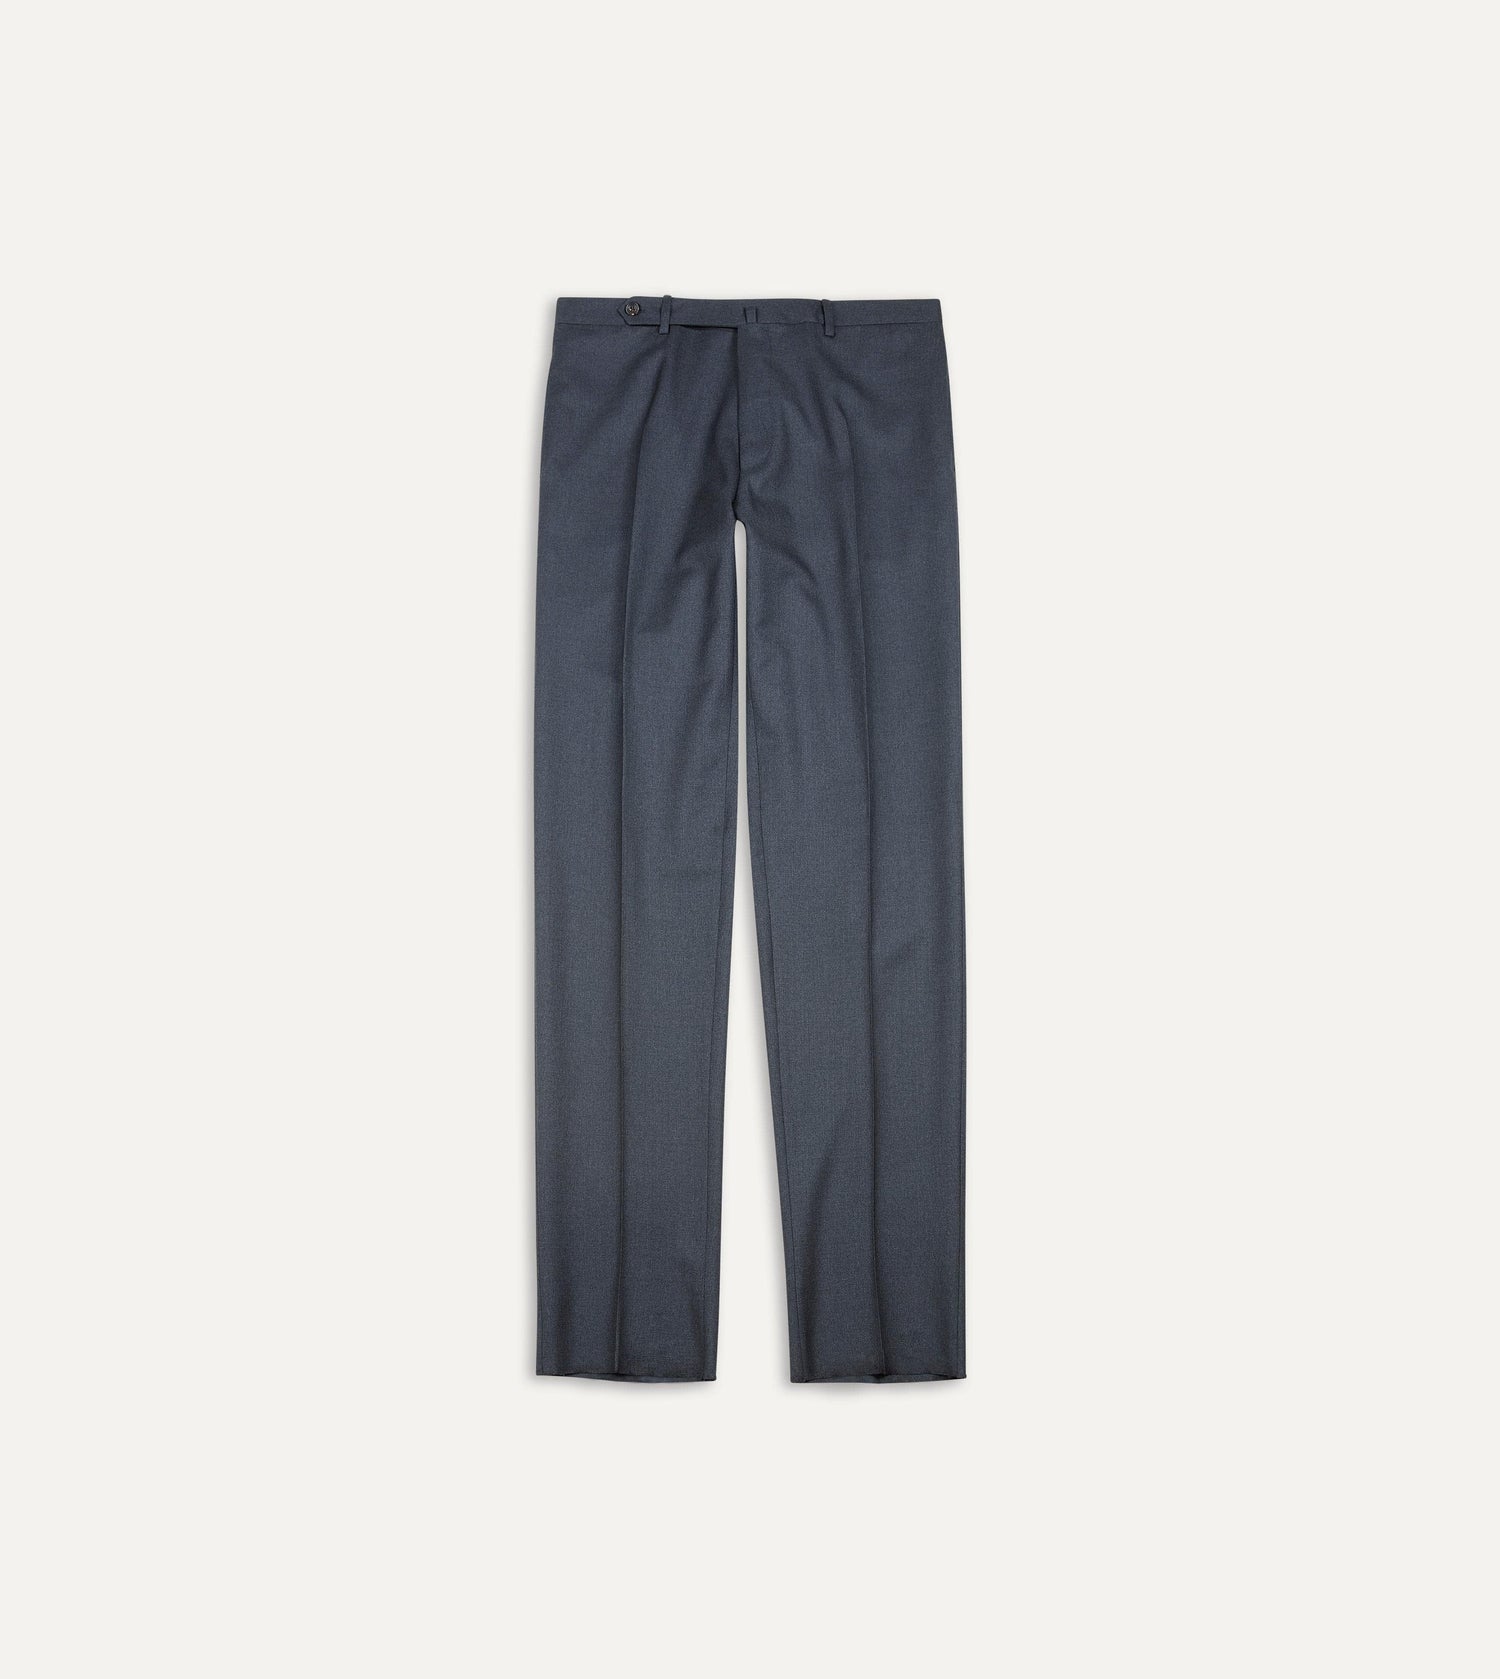 Grey Worsted Wool Flat Front Trouser